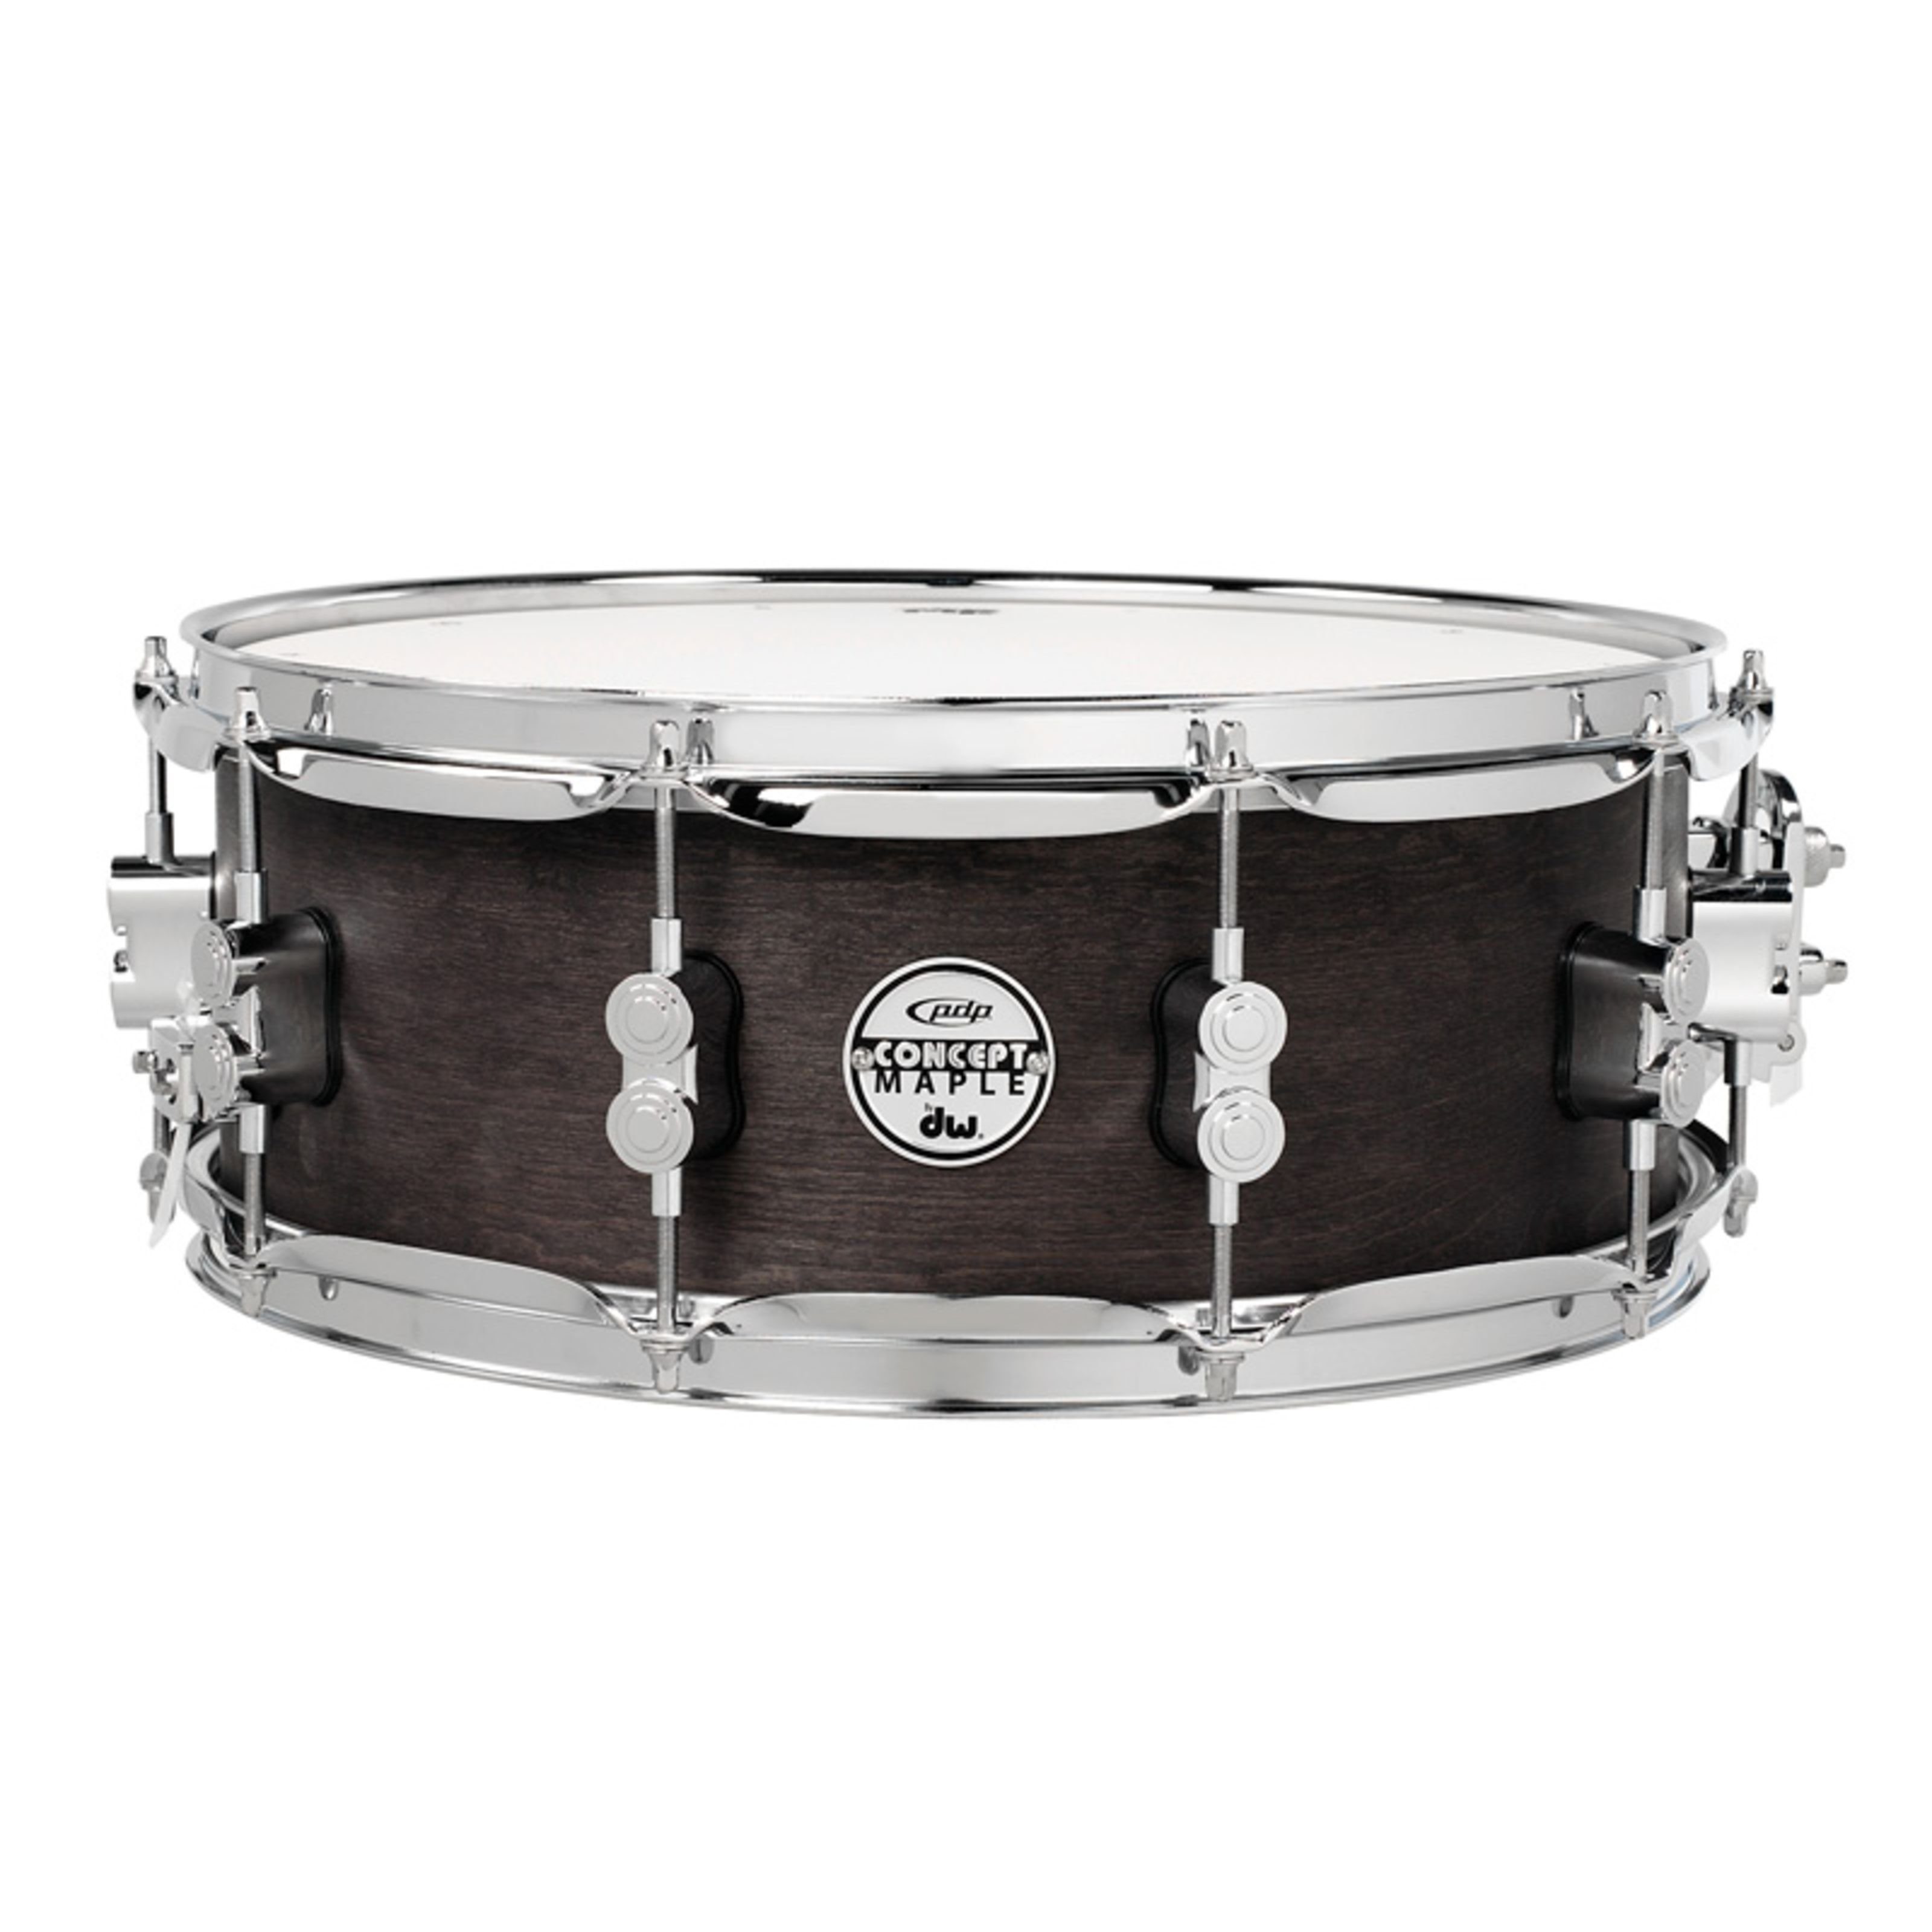 pdp Snare Drum,Black Wax Snare 14"x6,5", Black Wax Snare 14"x6,5" - Snare Drum